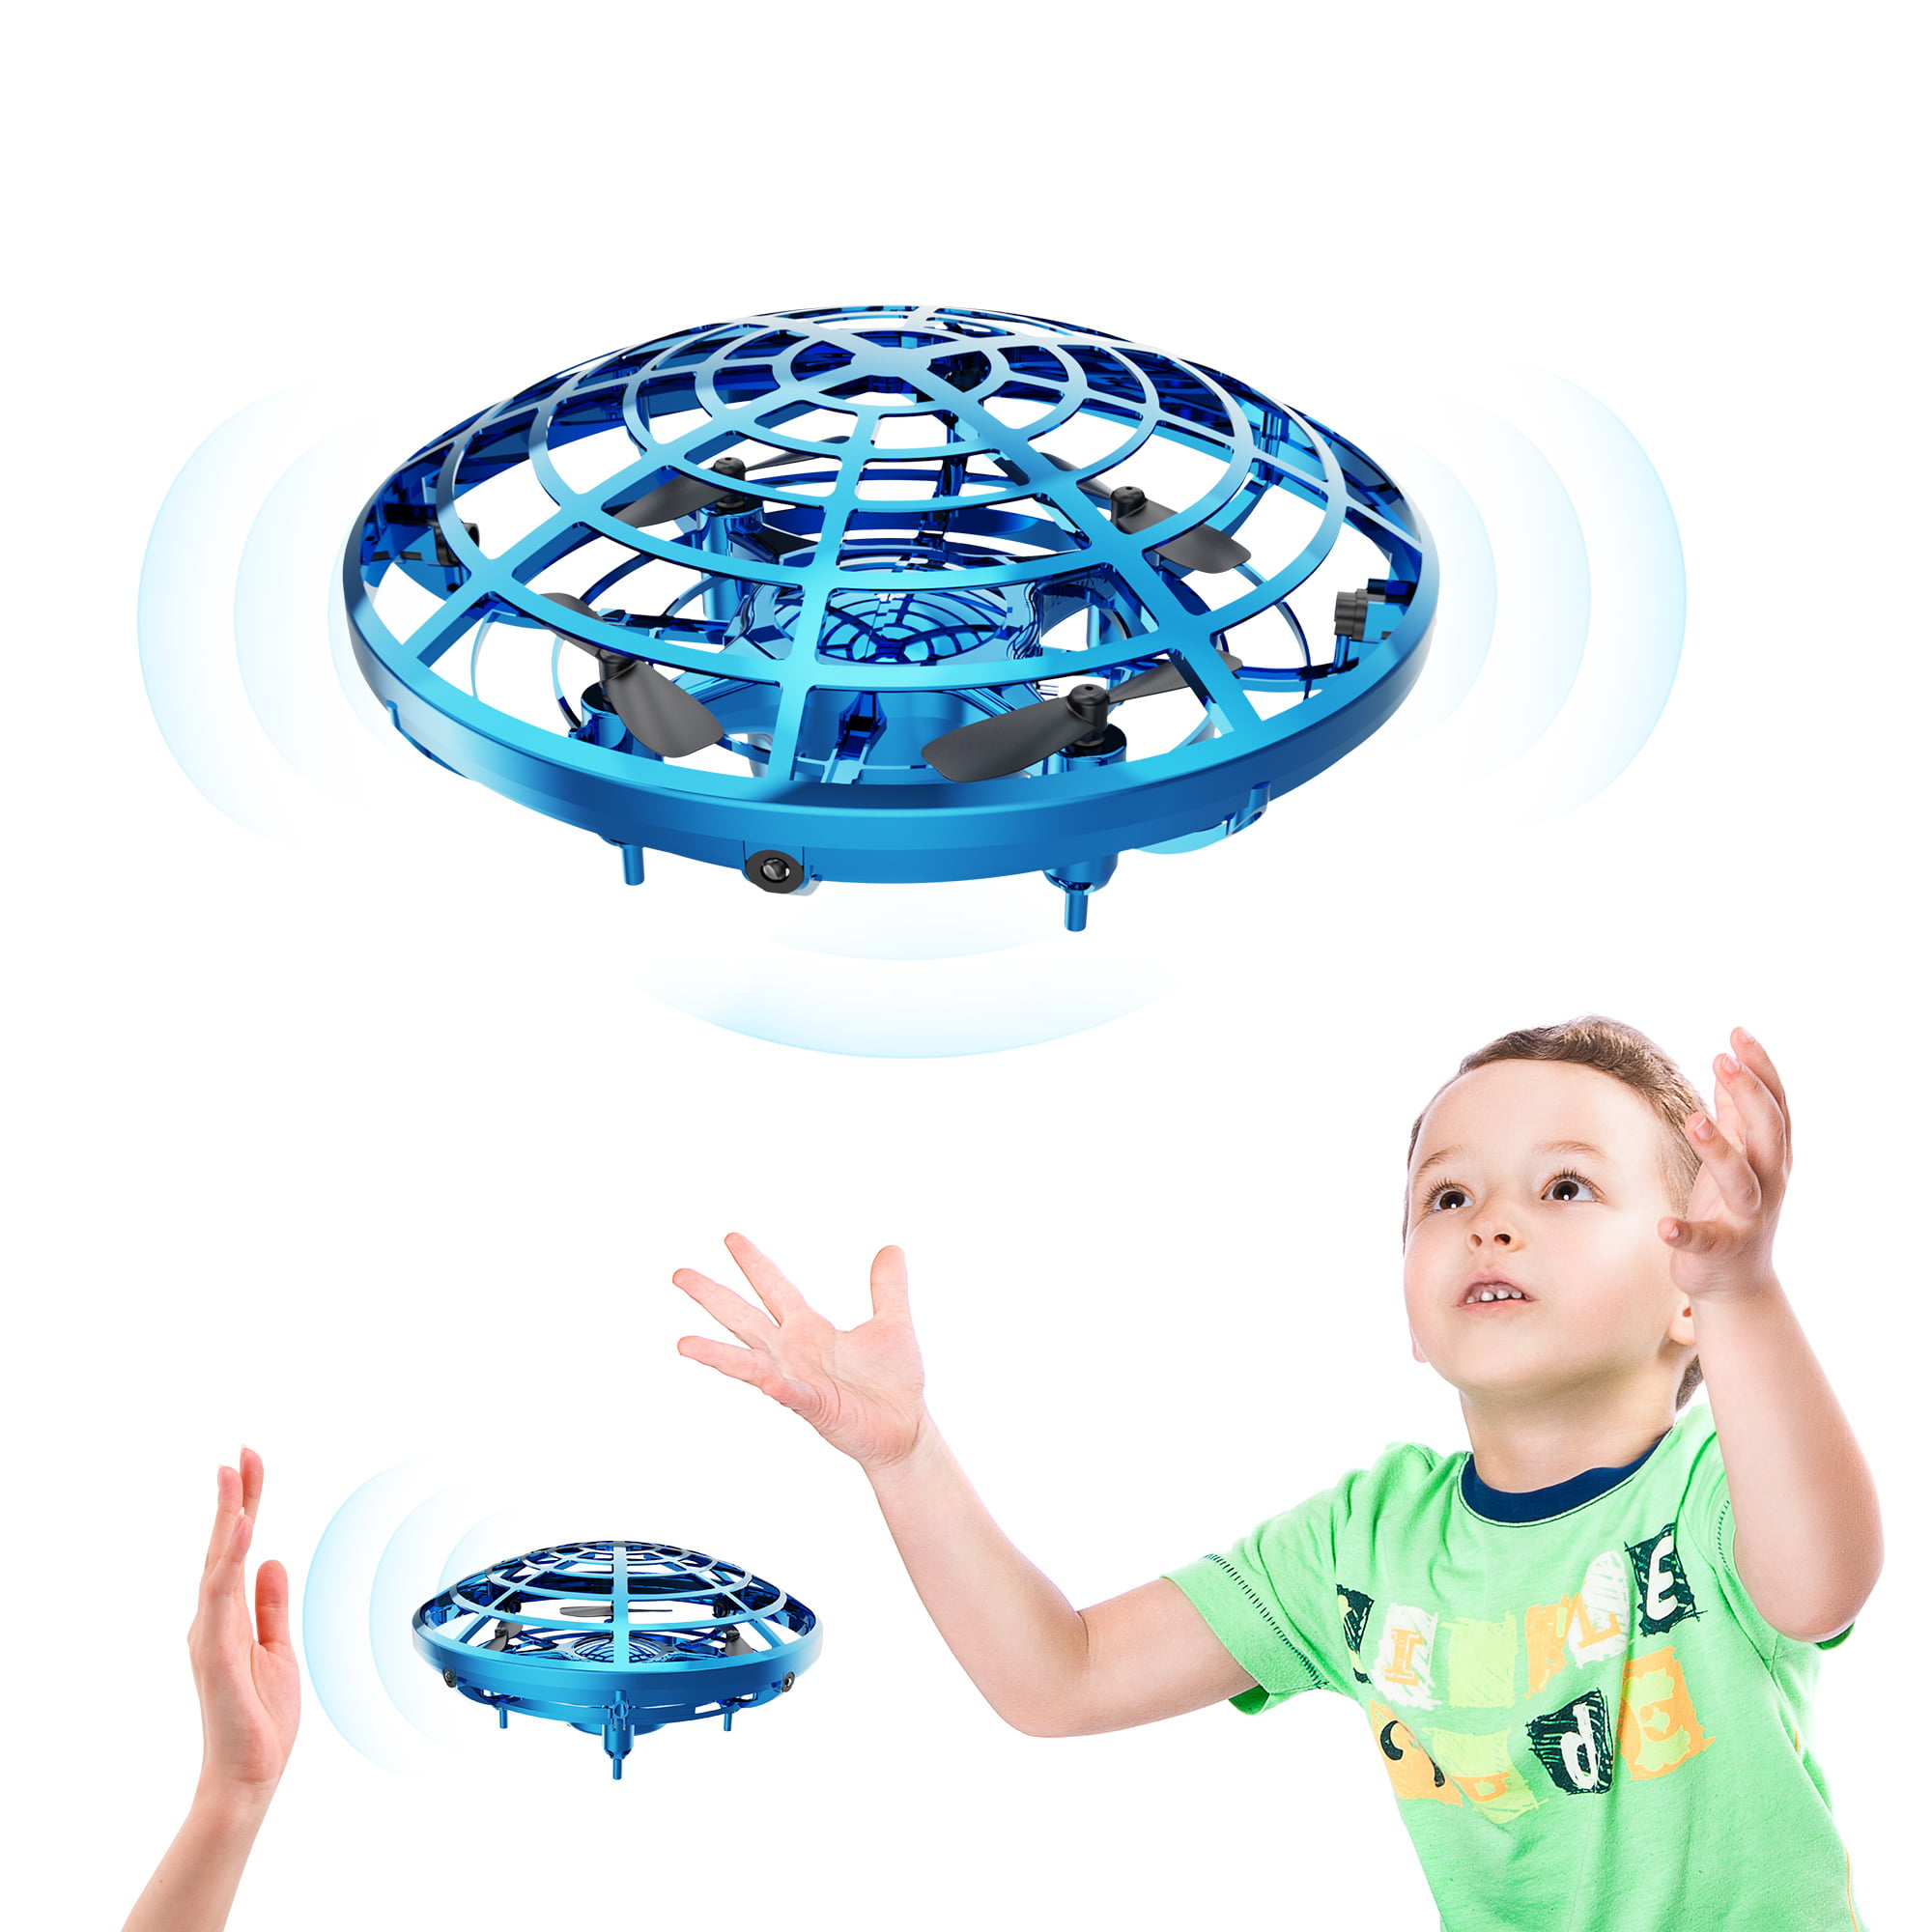 DEERC Hand-Operated Mini Drone for Indoor/Outdoor Play